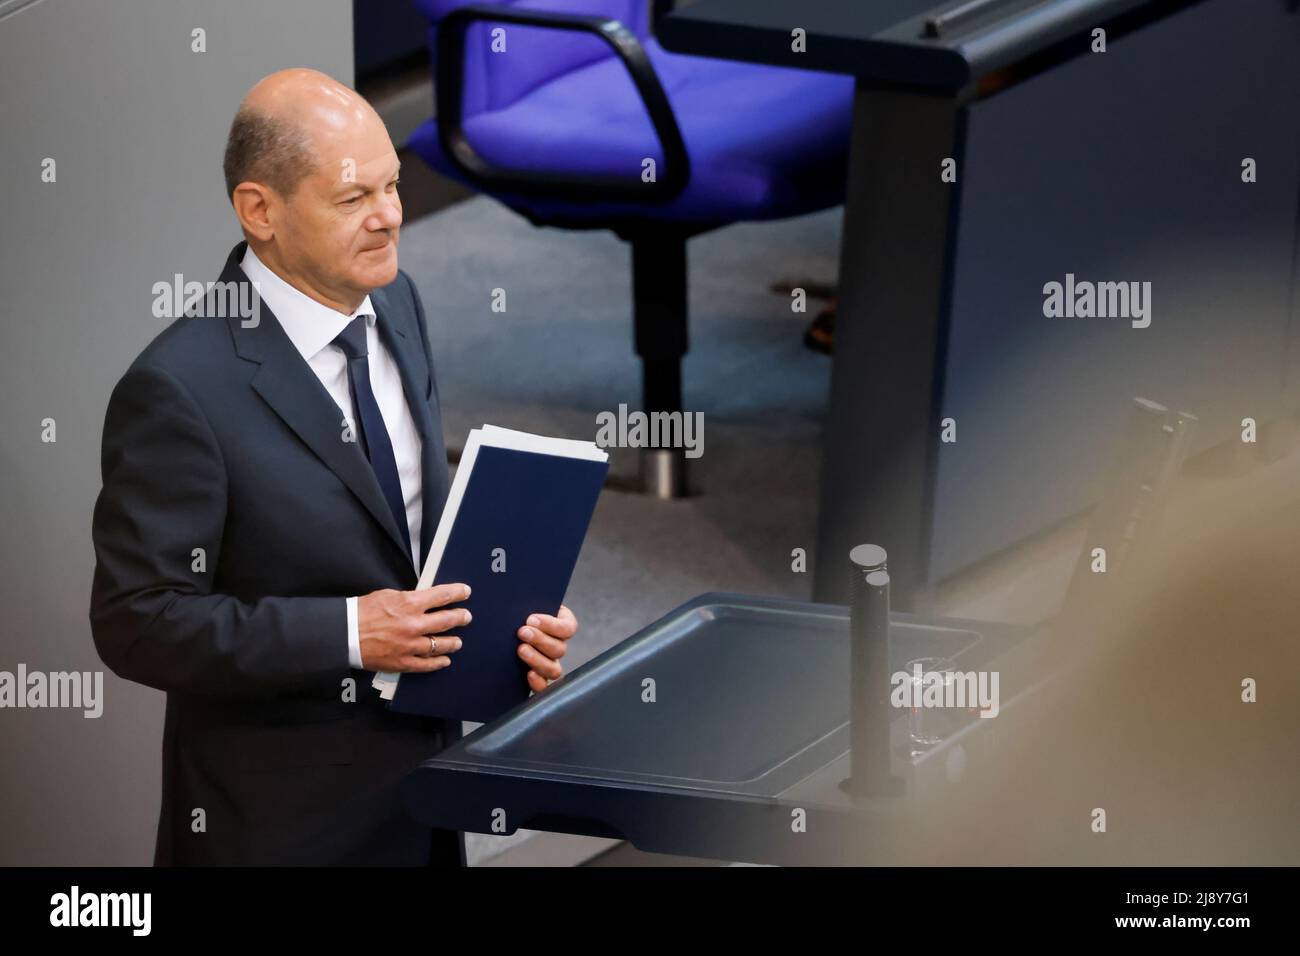 German Chancellor Olaf Scholz attends a session of Germany's lower house of parliament, the Bundestag, in Berlin, Germany, May 19, 2022. REUTERS/Hannibal Hanschke Stock Photo